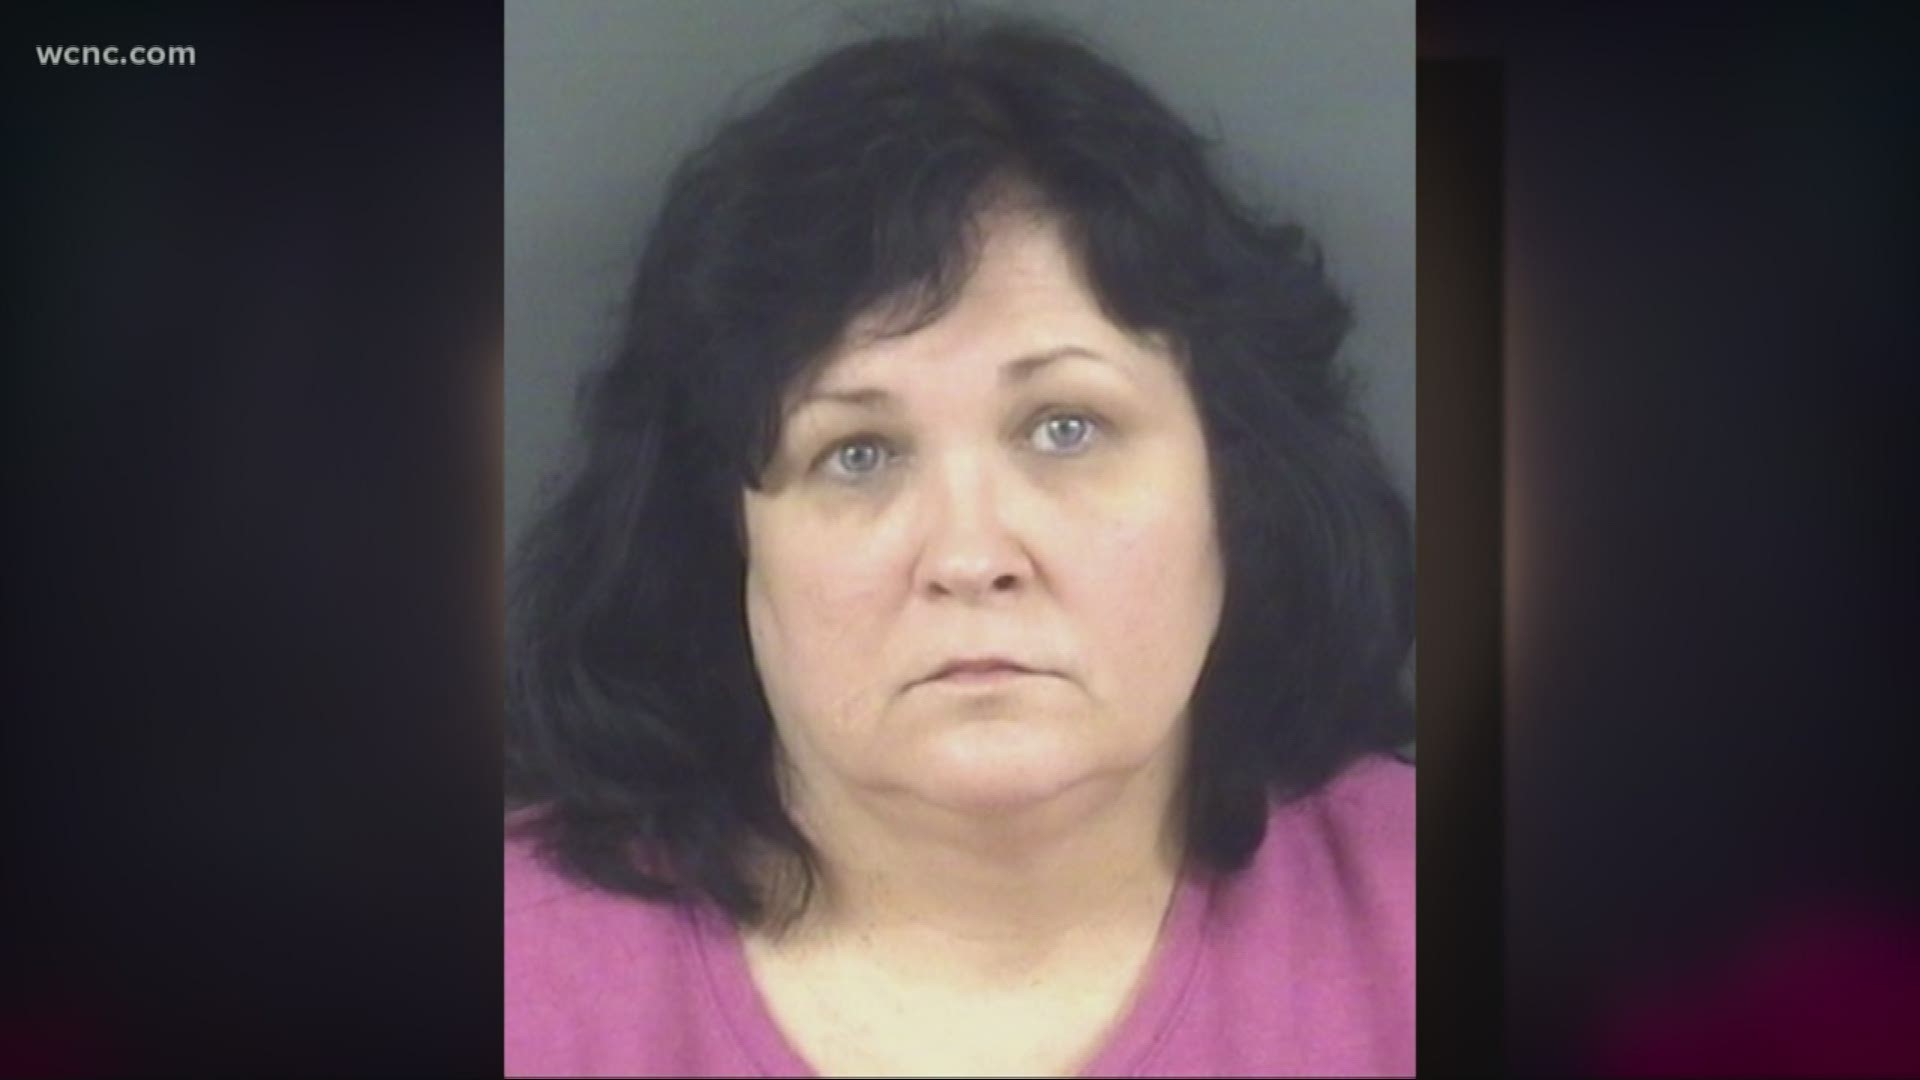 The Cumberland County Sheriff's Office said in a statement that it charged 54-year-old Deborah Riddle O’Conner with first-degree murder Thursday.